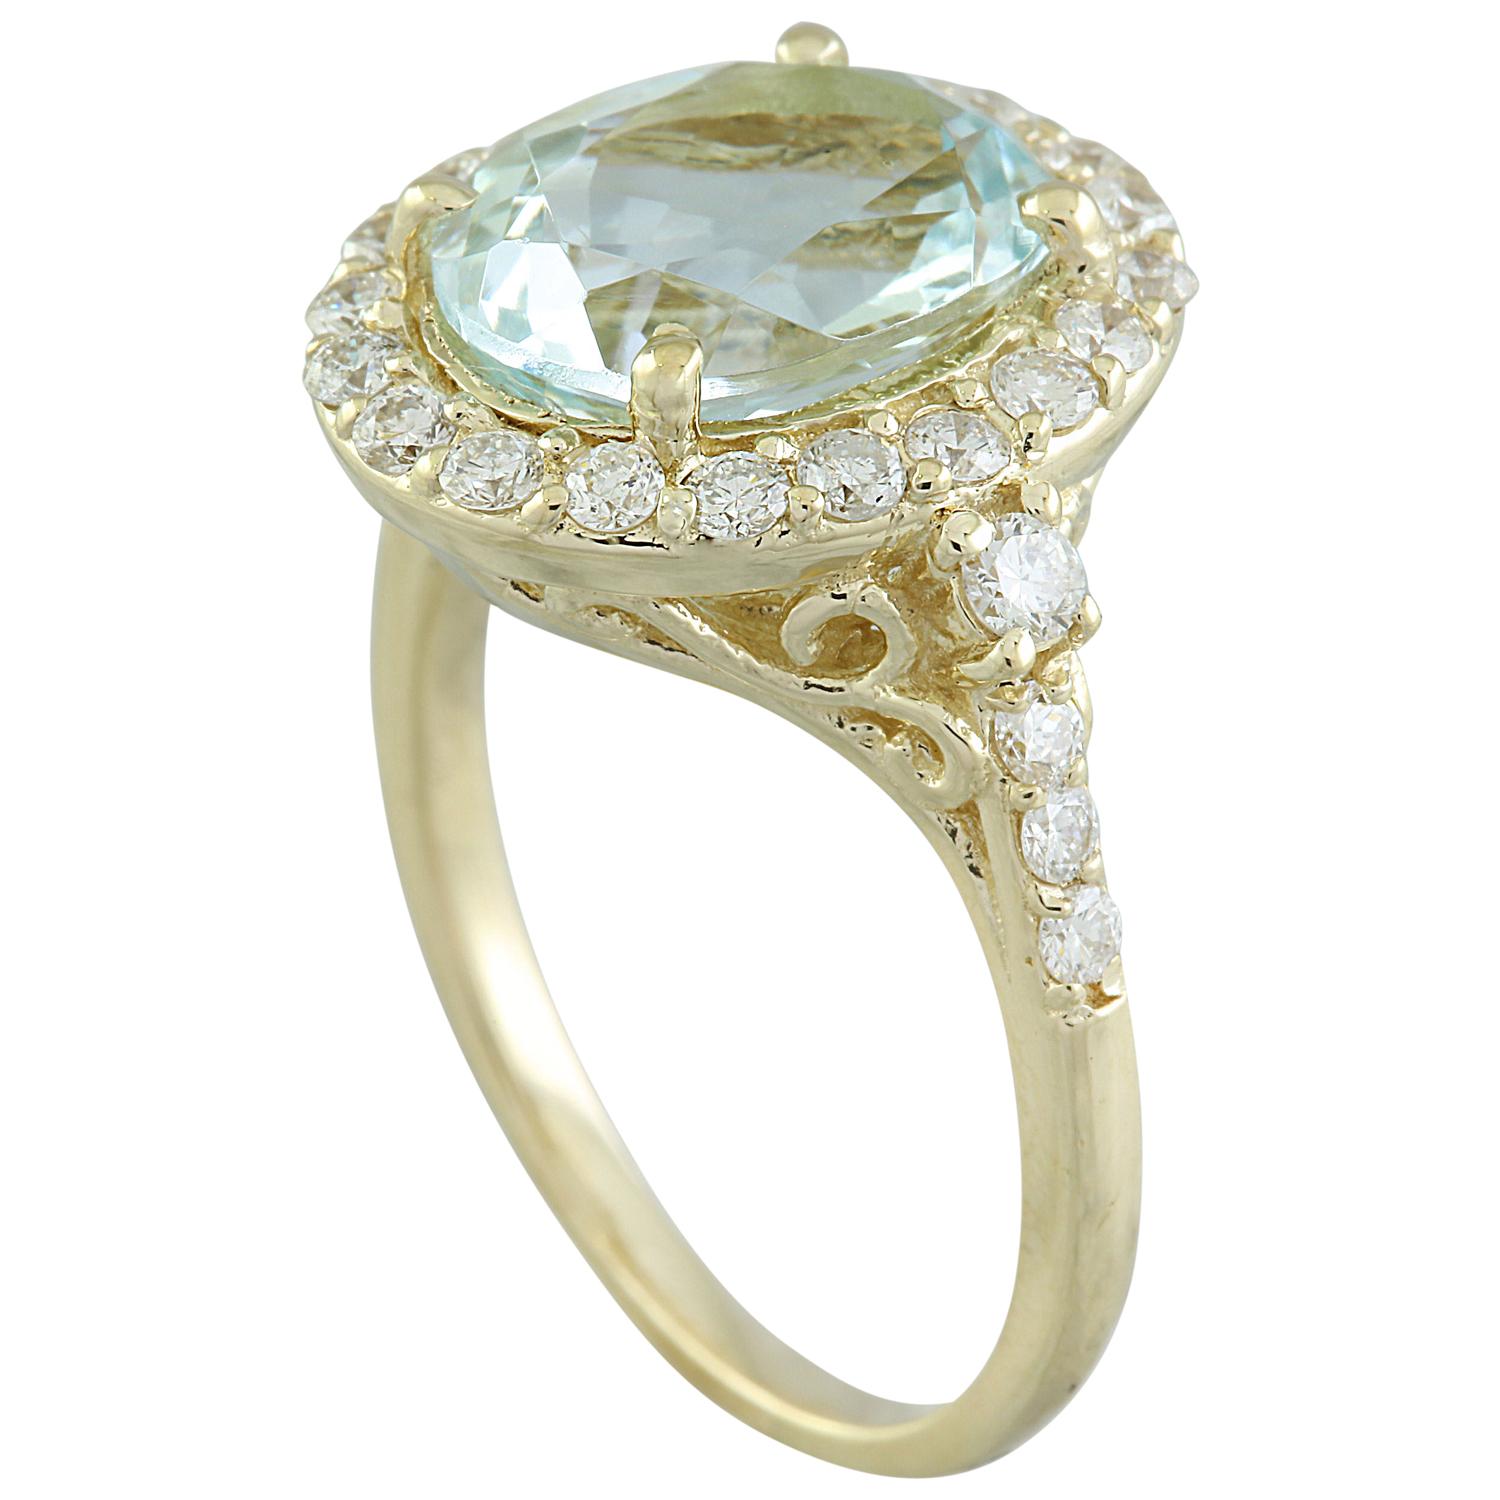 3.81 Carat Natural Aquamarine 14 Karat Solid Yellow Gold Diamond Ring
Stamped: 14K 
Total Ring Weight: 5.6 Grams 
Aquamarine Weight: 3.11 Carat (11.00x9.00 Millimeters)
Diamond Weight: 0.70 Carat (F-G Color, VS2-SI1 Clarity )
Quantity: 28
Face